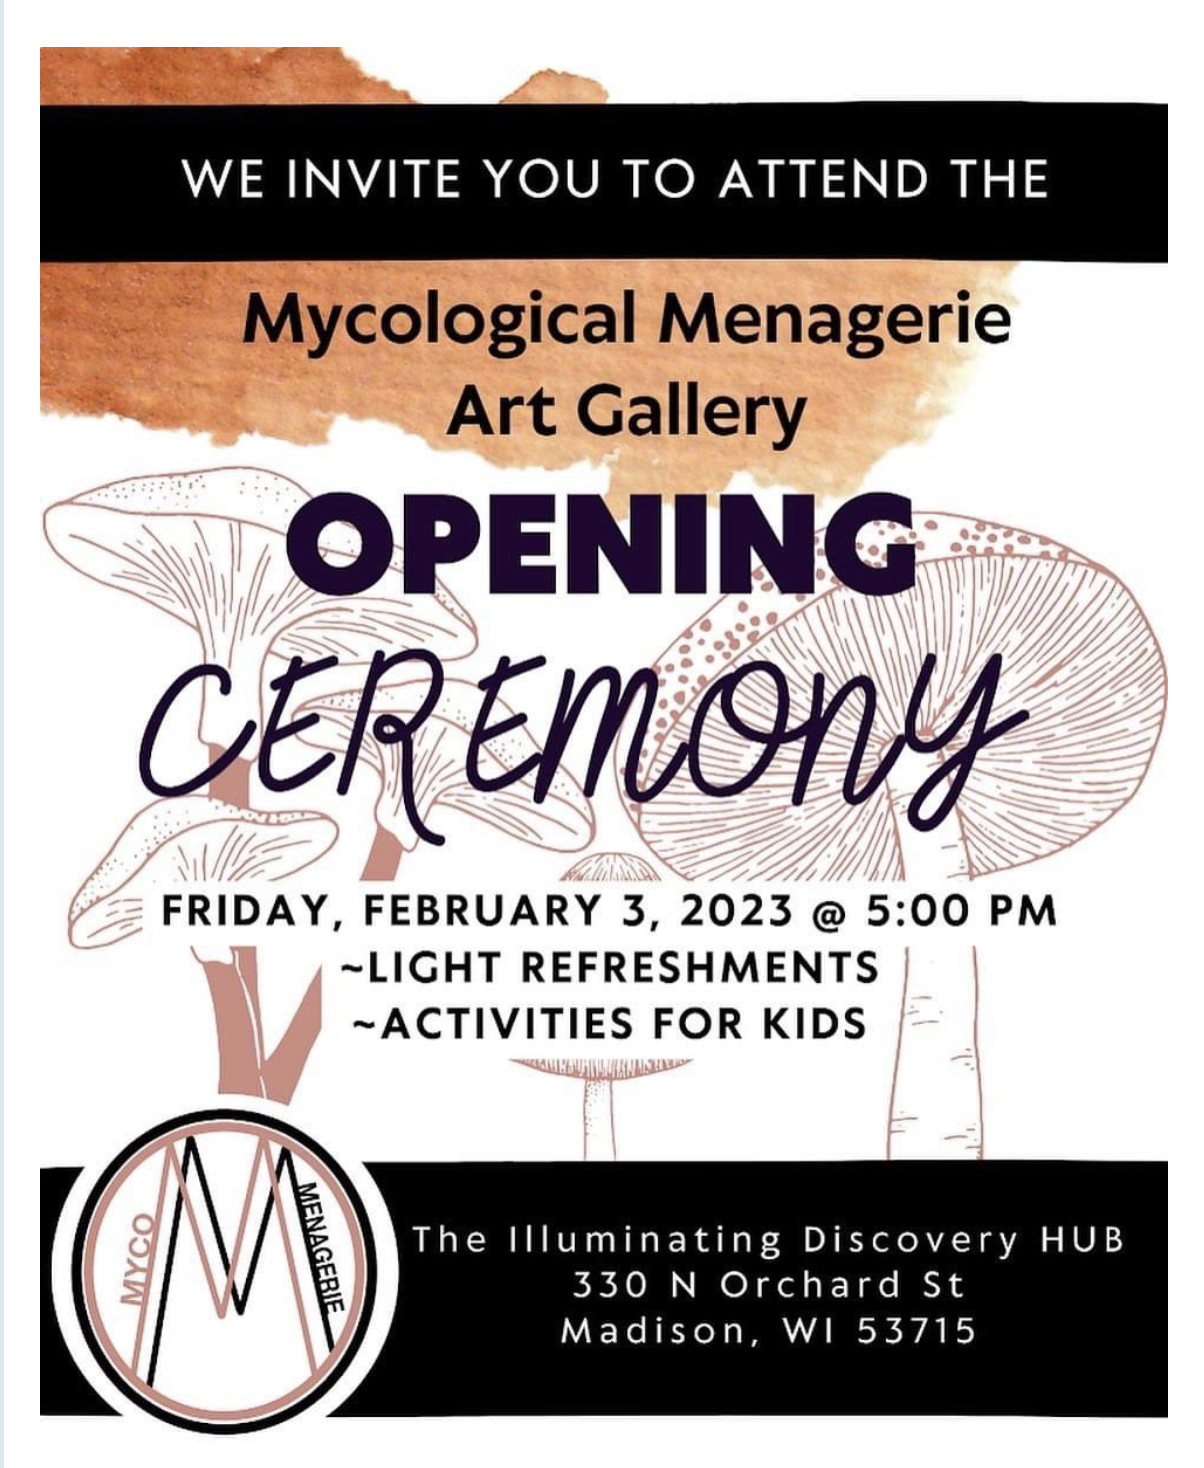 Mycological Menagerie Art Gallery Opening 2/3/2023 4-5:30pm